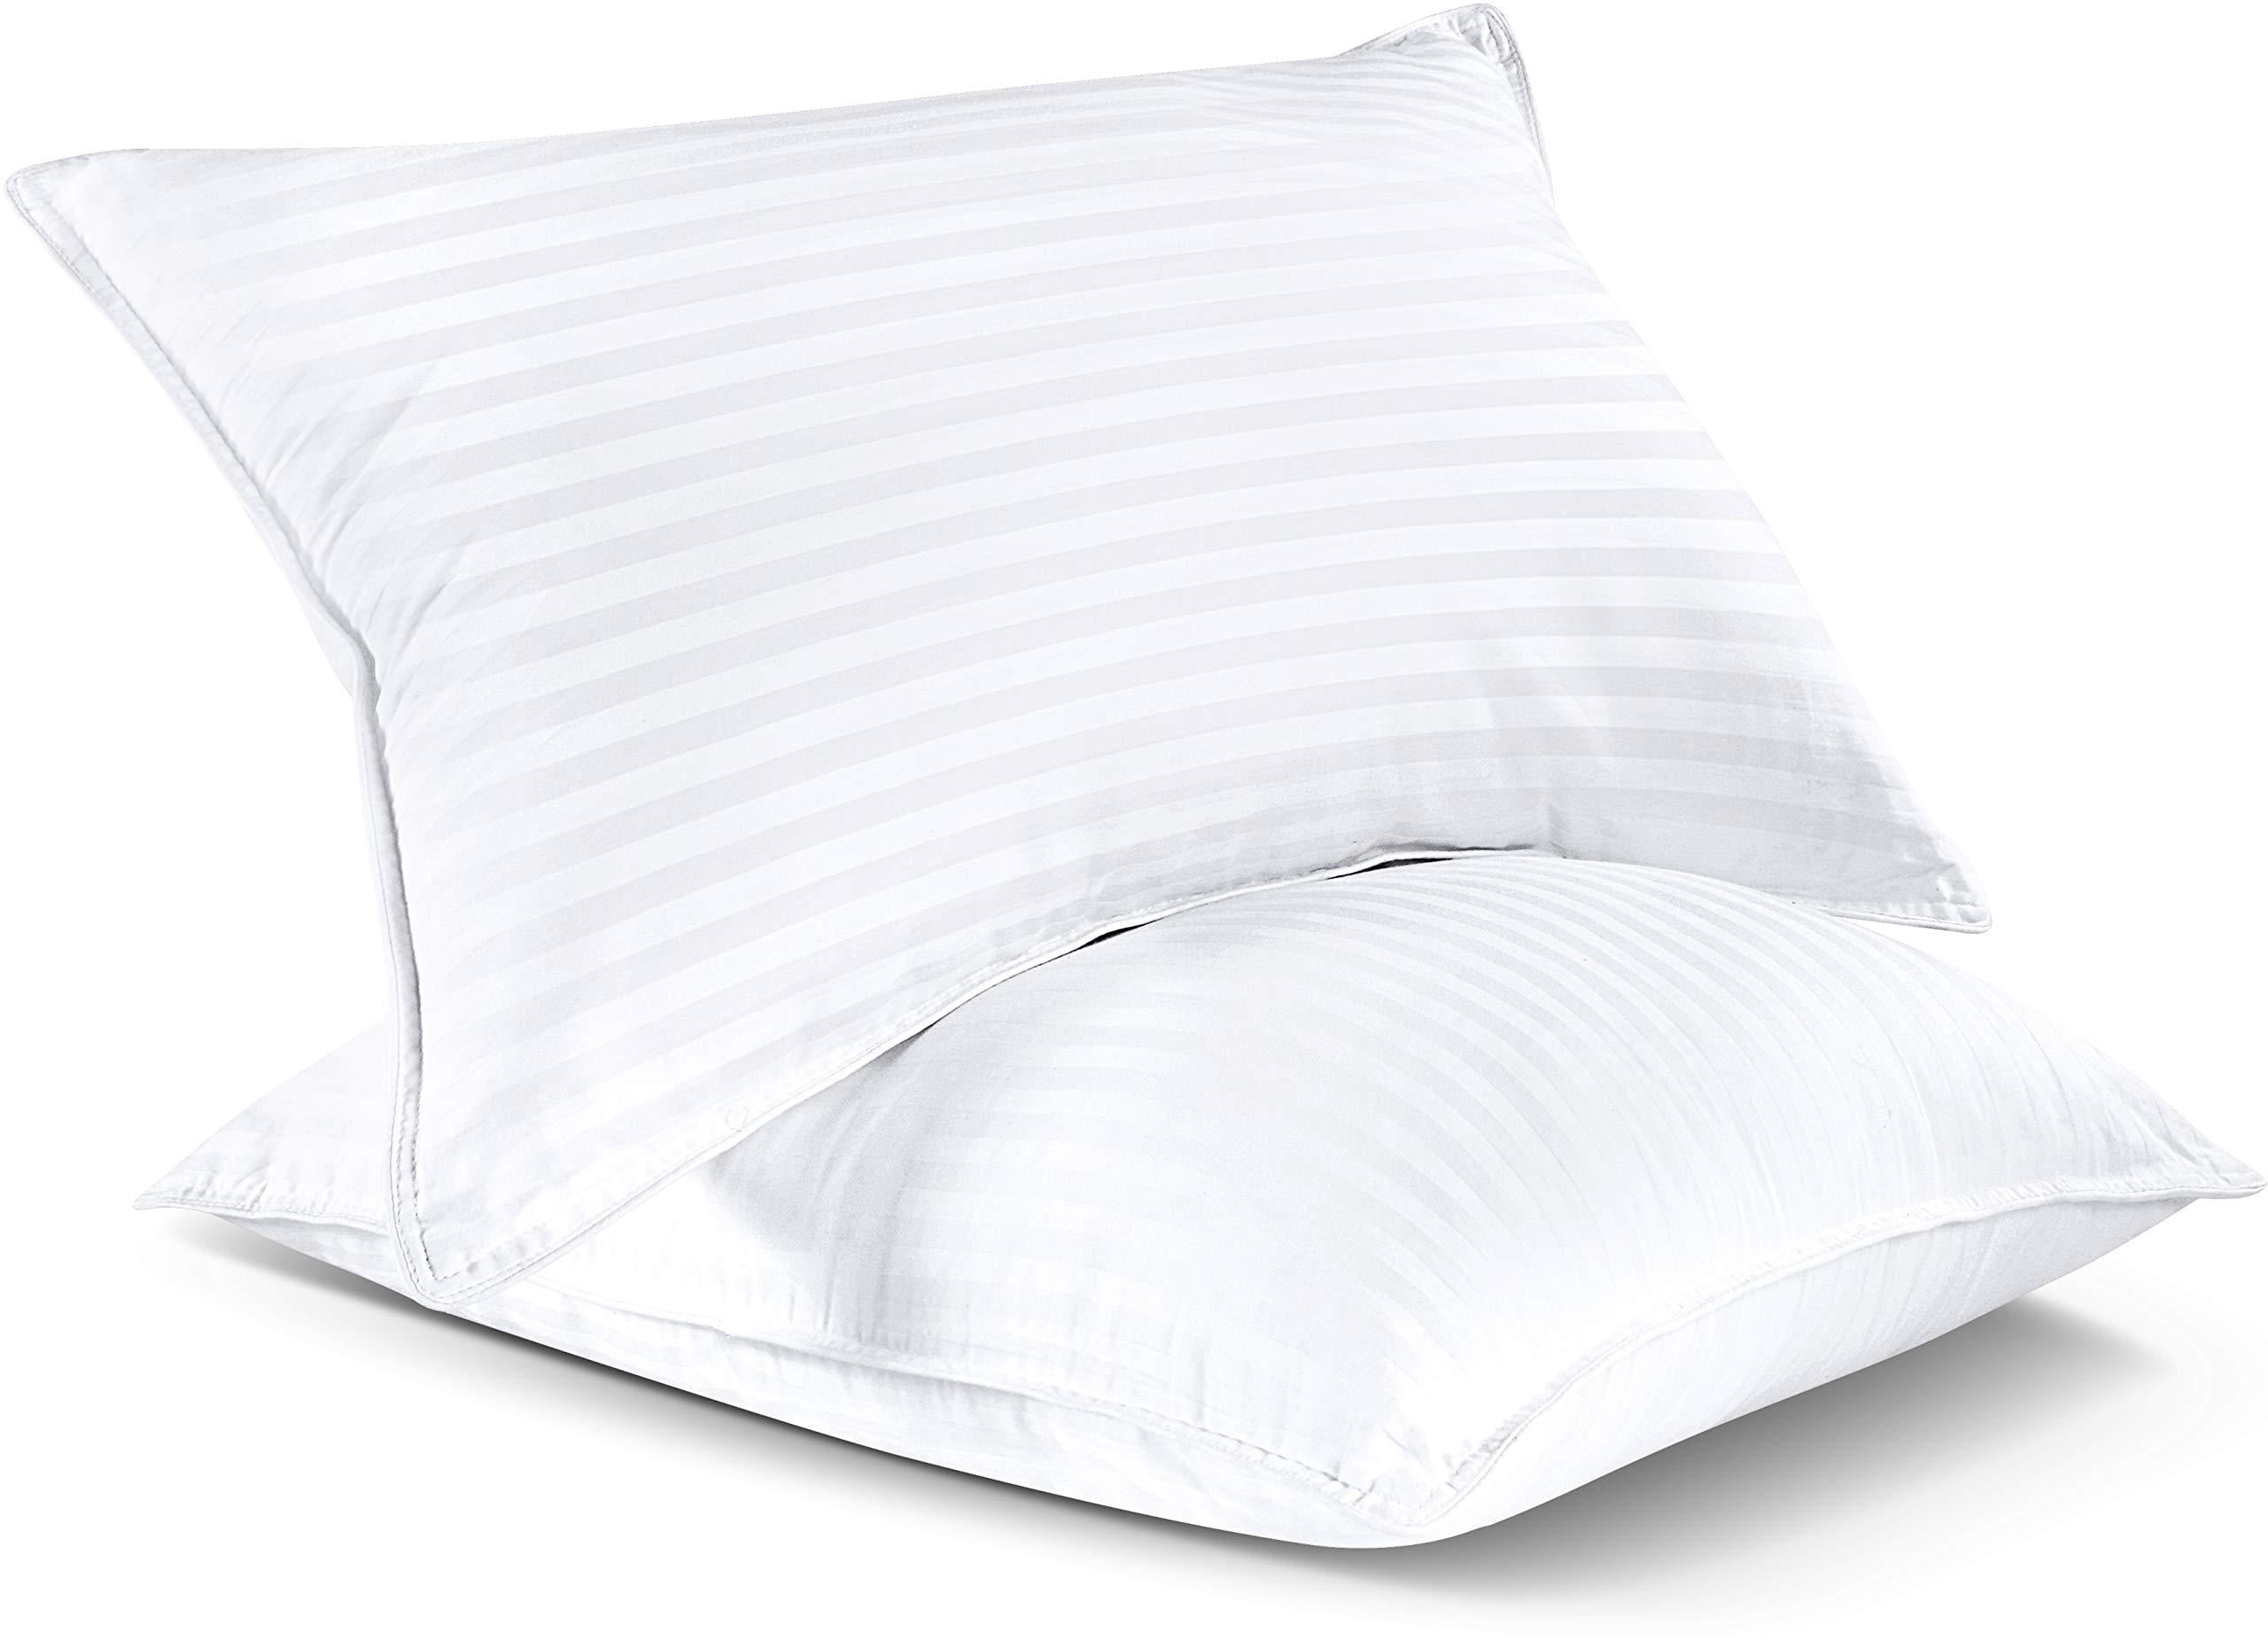 Utopia Bedding Bed Pillows for Sleeping King Size (White), Set of 2,  Cooling Hotel Quality, Gusseted Pillow for Back, Stomach or Side Sleepers